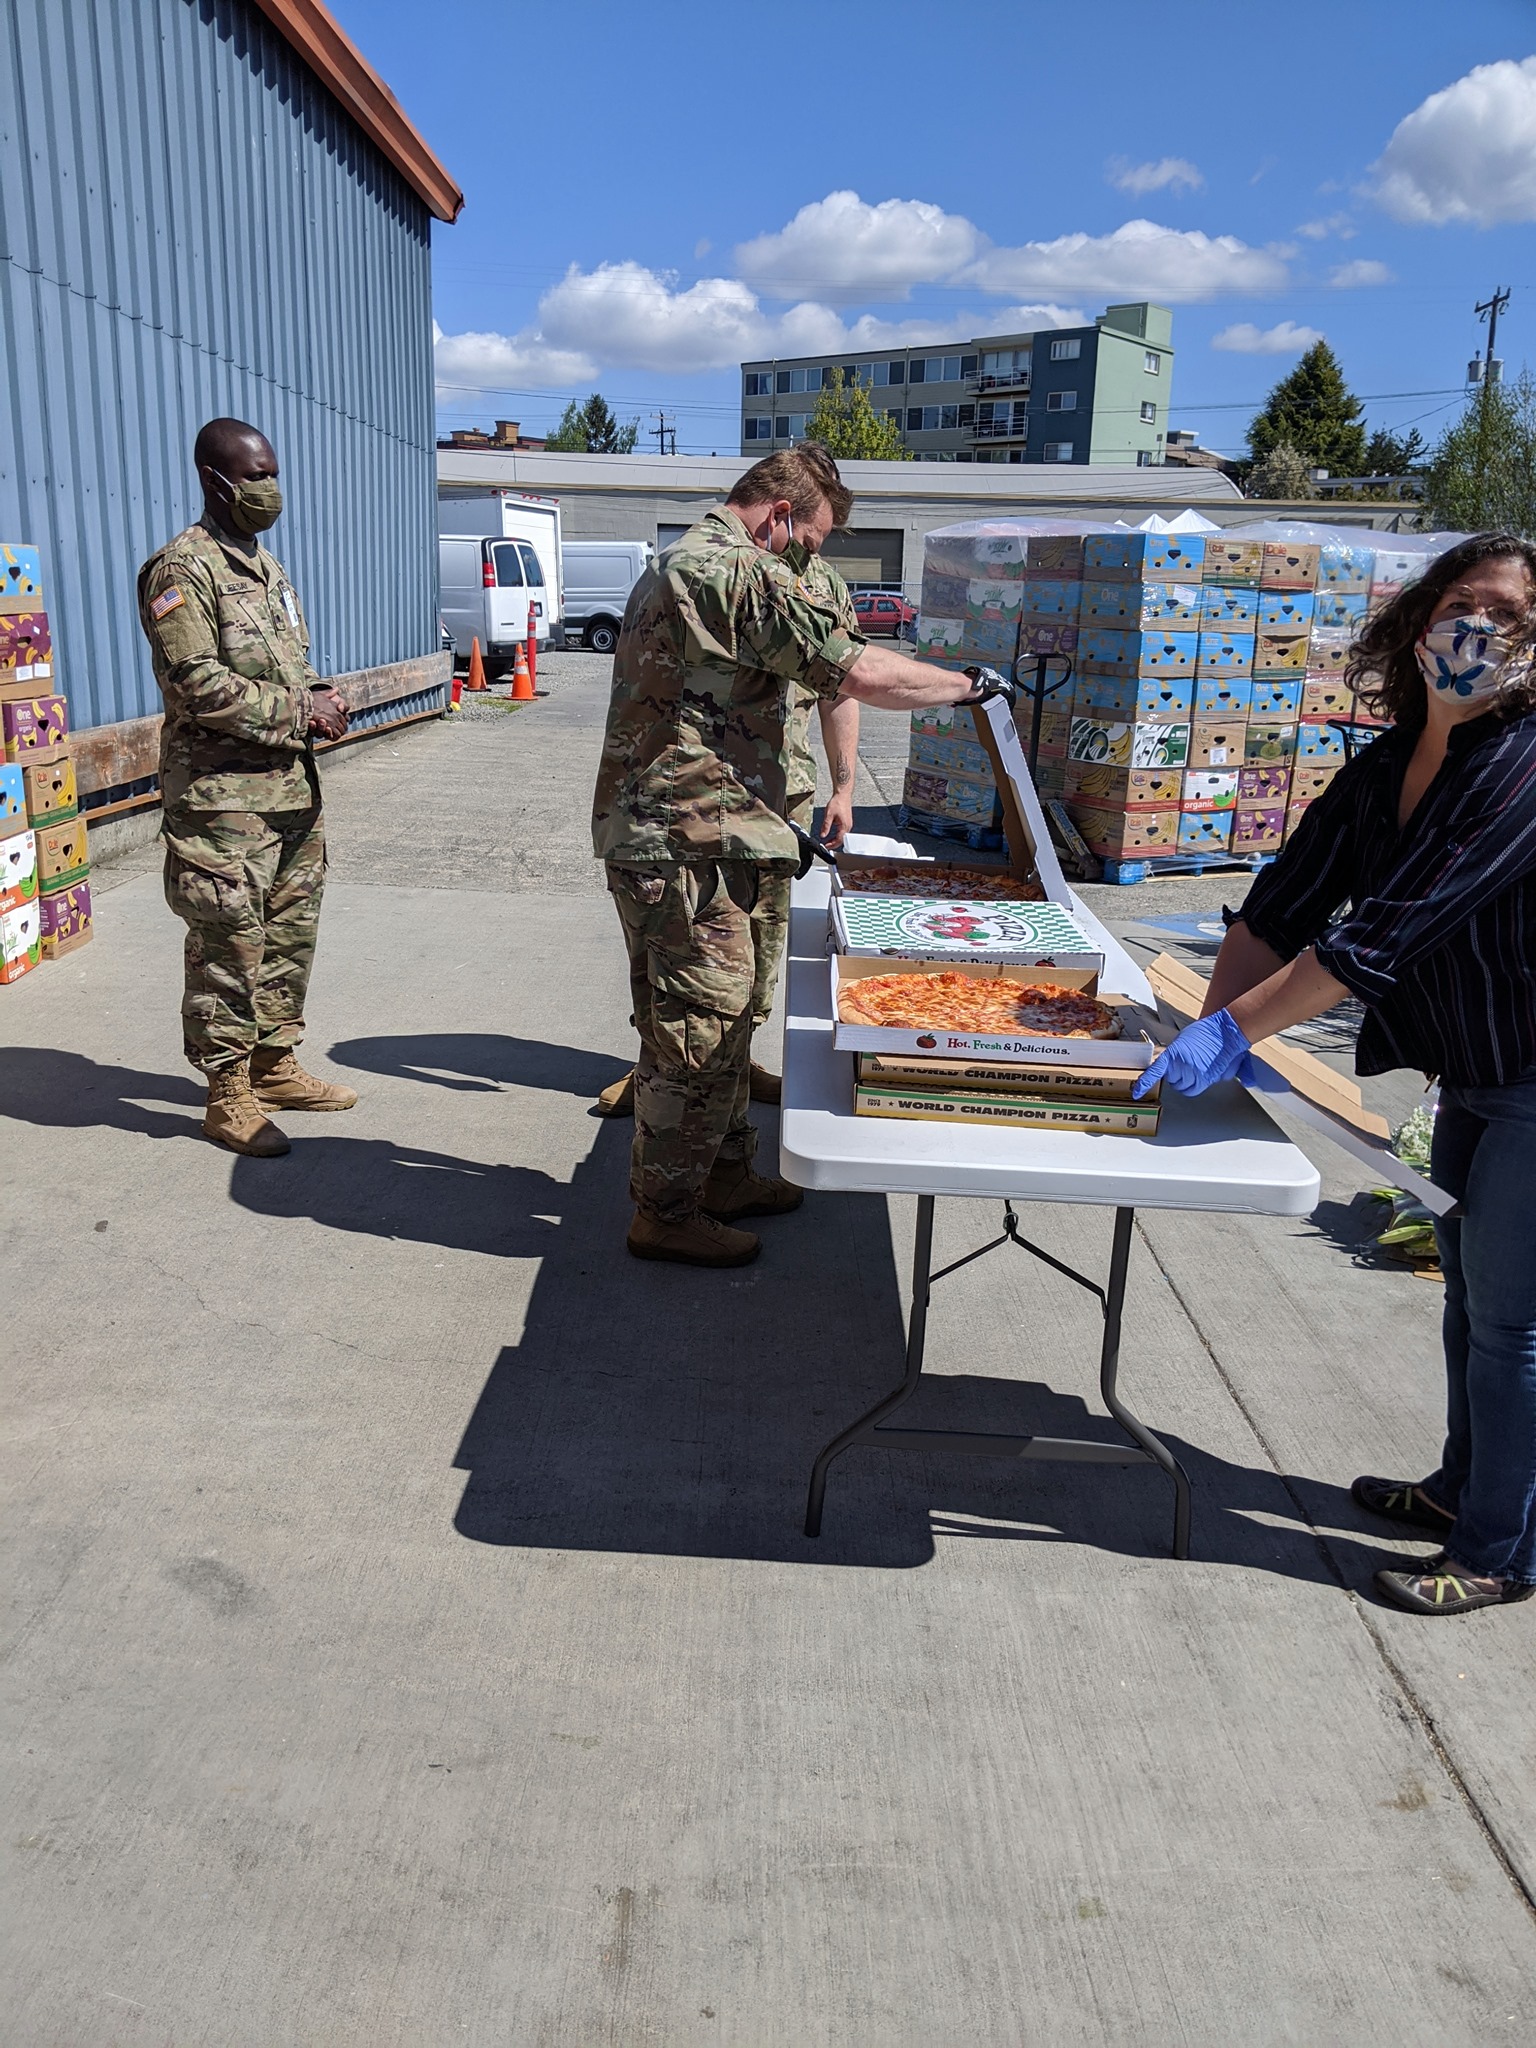 Soldiers at food bank